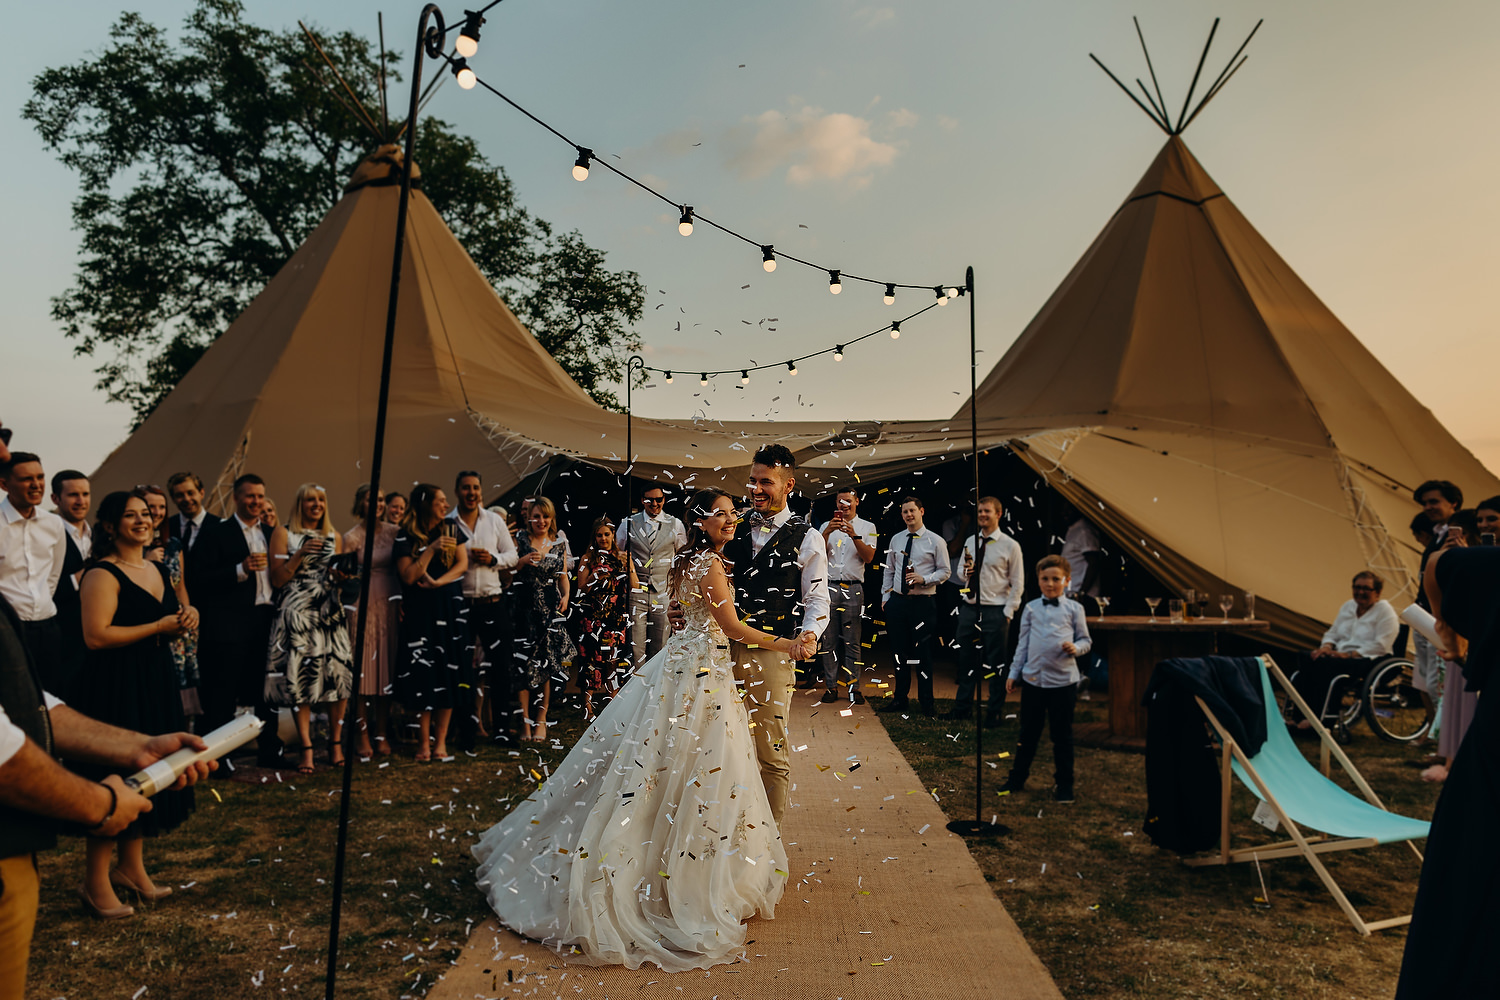 bride and groom first dance outside tipi at sunset with guests watching